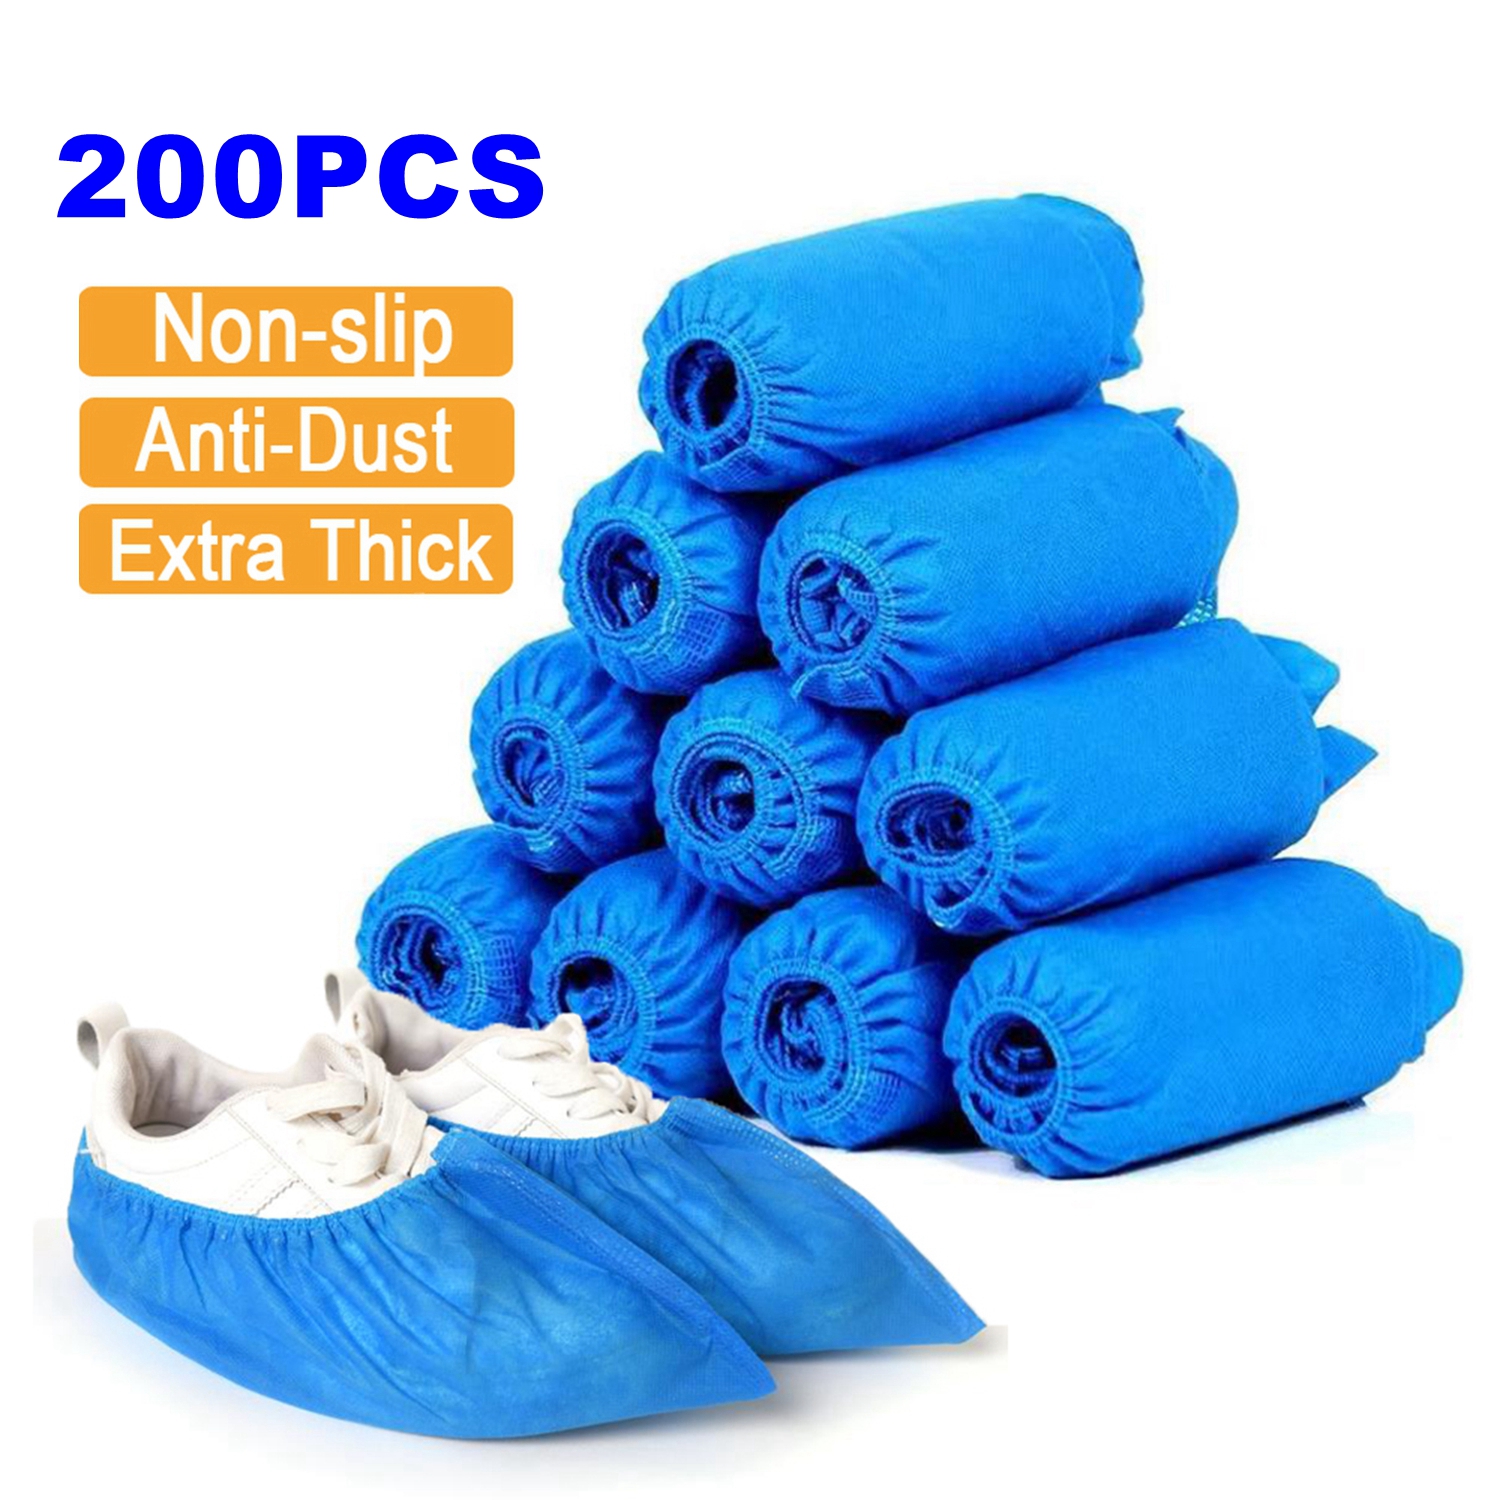 2 Pack of 100 Overshoes Disposable Non-Slip Extra Thick Boot Shoe Covers for Carpet Floor Protection Indoor KINDOYO Waterproof Shoe Covers 